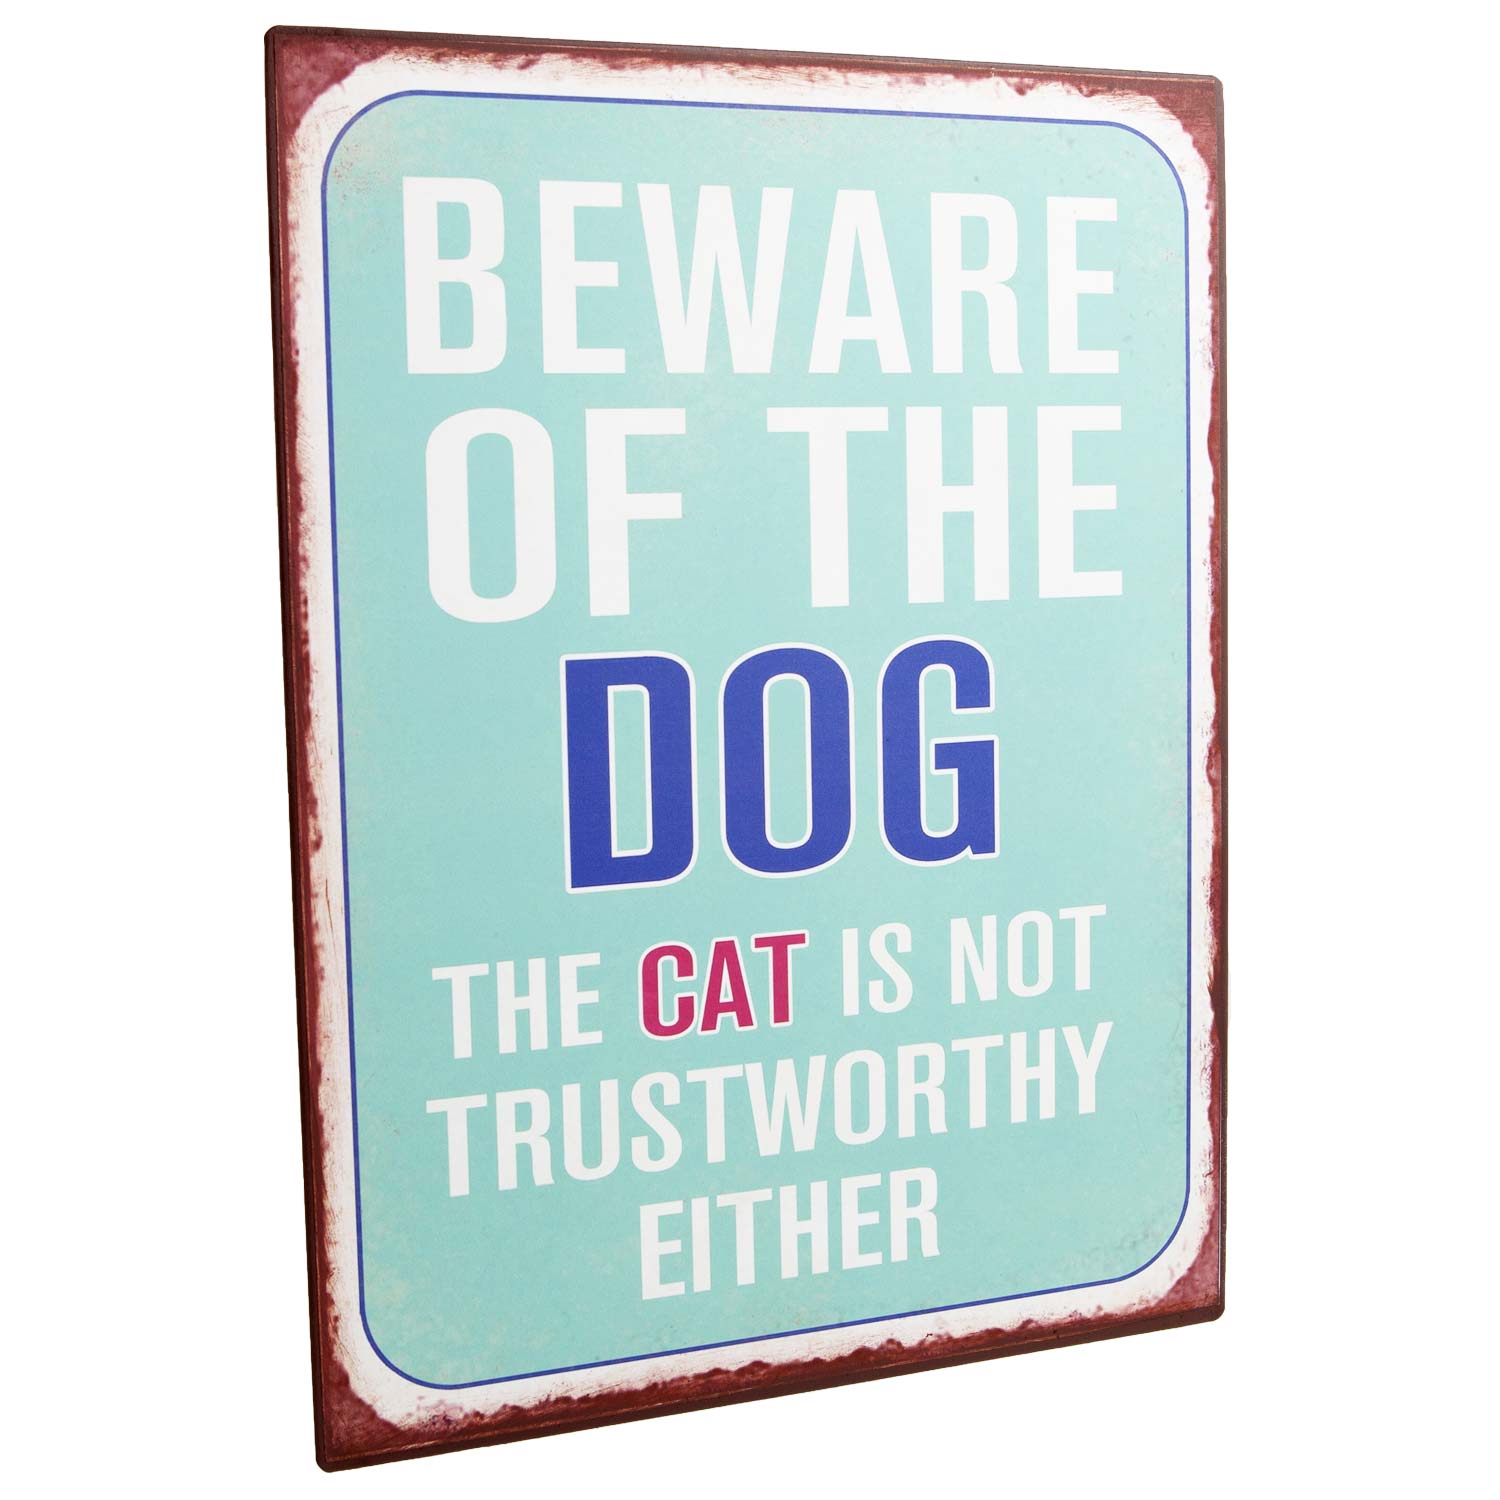 Dog Krazy Gifts - Beware Of The Dog The Cat Is Not Trustworthy Either Metal Sign part of the wide range dog themed signs available from DogKrazyGifts.co.uk